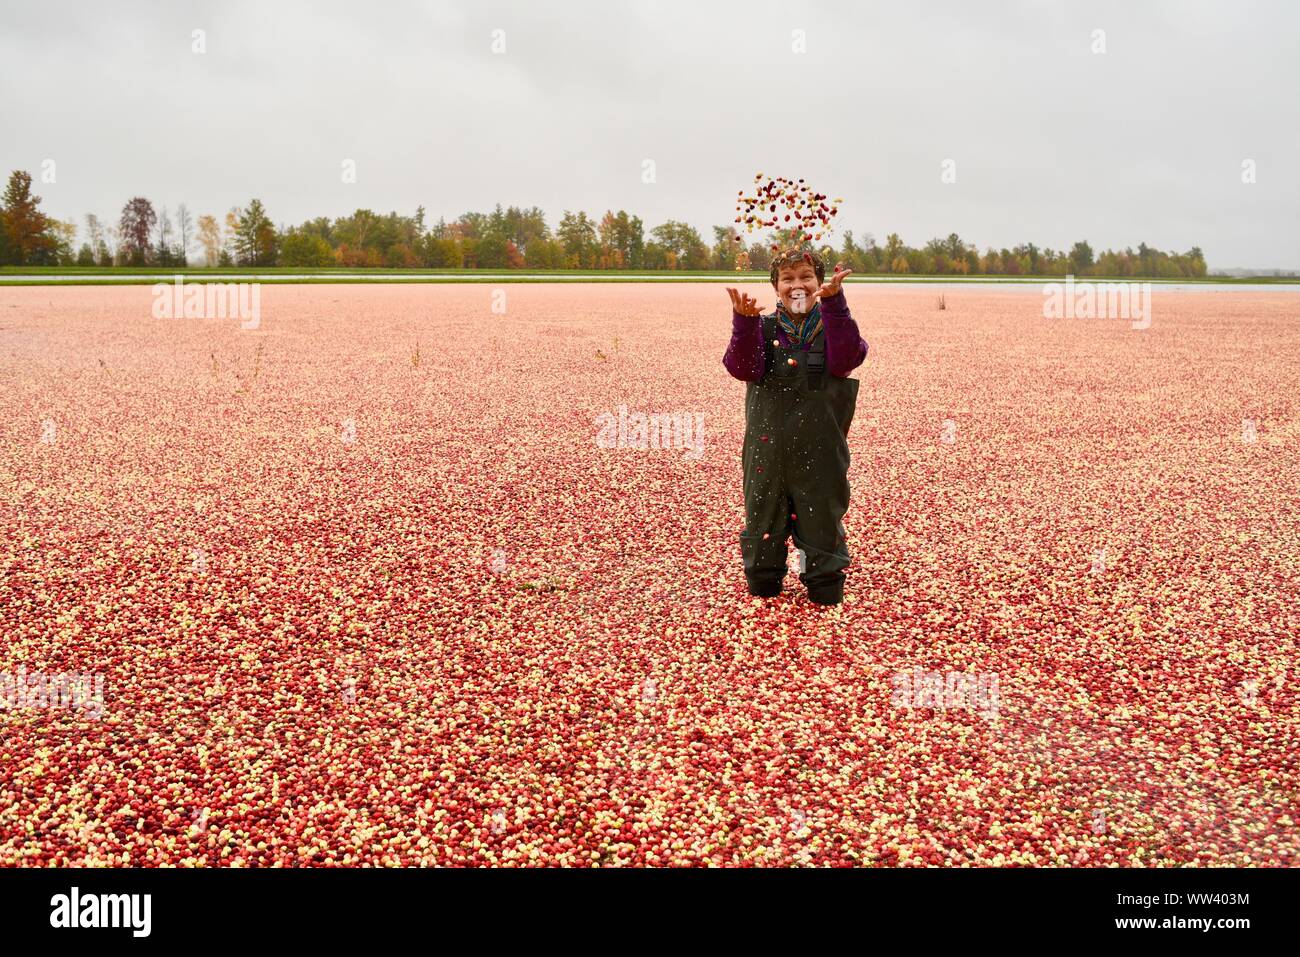 Laughing woman in waders tossing cranberries in air surrounded by millions of red cranberries floating on surface, Wisconsin Rapids, Wisconsin, USA Stock Photo